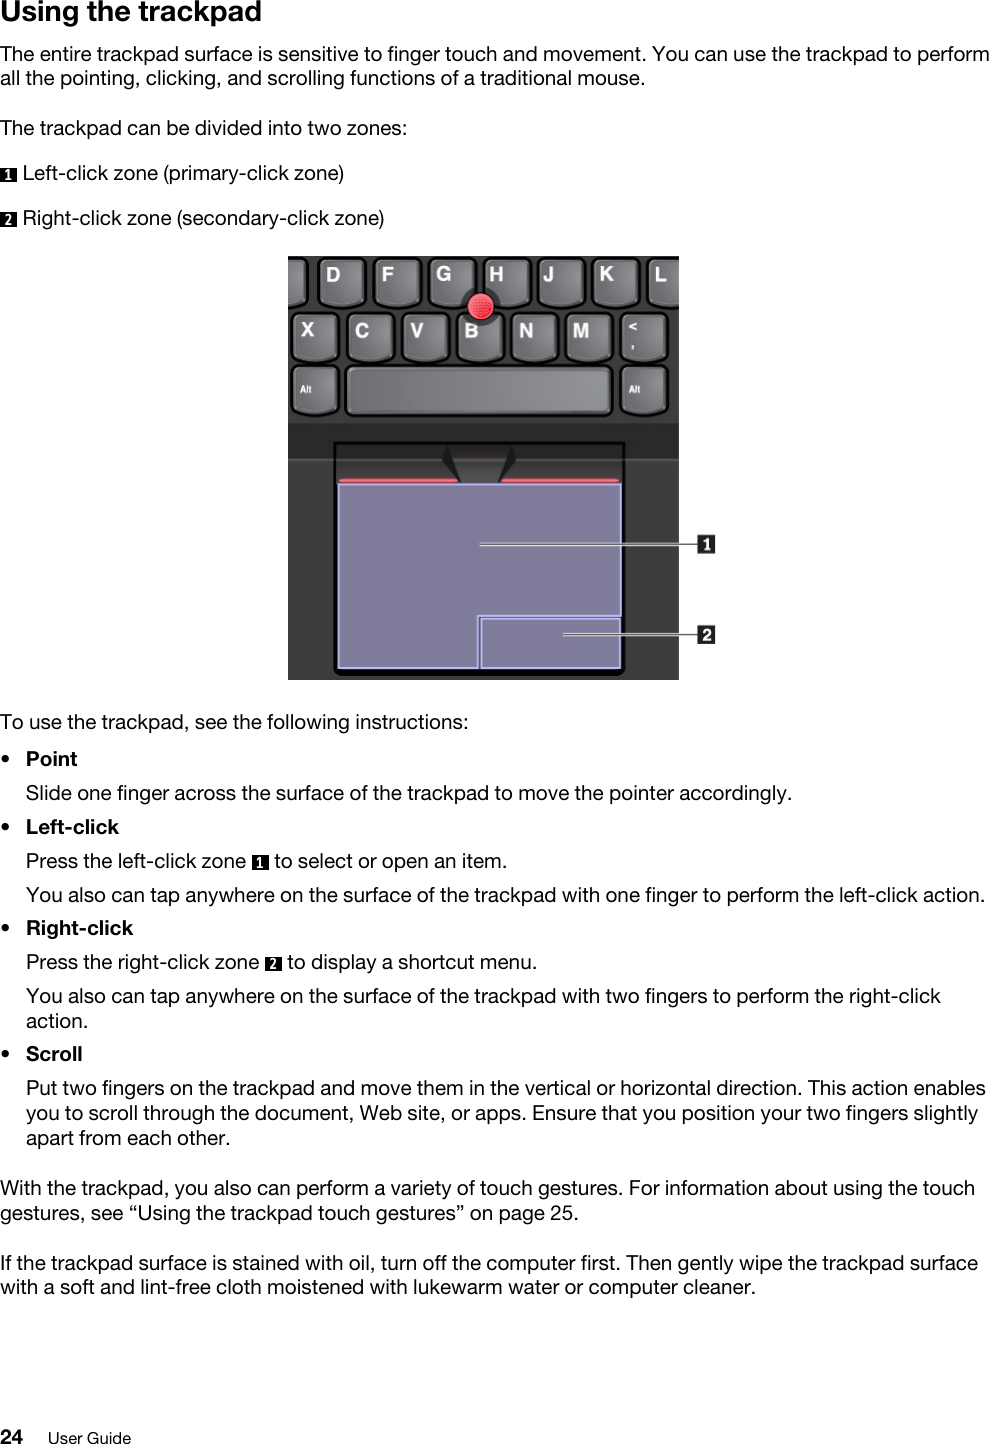 Using the trackpadThe entire trackpad surface is sensitive to finger touch and movement. You can use the trackpad to perform all the pointing, clicking, and scrolling functions of a traditional mouse. The trackpad can be divided into two zones:1  Left-click zone (primary-click zone)2  Right-click zone (secondary-click zone)To use the trackpad, see the following instructions: •  Point Slide one finger across the surface of the trackpad to move the pointer accordingly.•  Left-click Press the left-click zone  1  to select or open an item. You also can tap anywhere on the surface of the trackpad with one finger to perform the left-click action.•  Right-click Press the right-click zone  2  to display a shortcut menu. You also can tap anywhere on the surface of the trackpad with two fingers to perform the right-click action.•  Scroll Put two fingers on the trackpad and move them in the vertical or horizontal direction. This action enables you to scroll through the document, Web site, or apps. Ensure that you position your two fingers slightly apart from each other.With the trackpad, you also can perform a variety of touch gestures. For information about using the touch gestures, see “Using the trackpad touch gestures” on page 25.If the trackpad surface is stained with oil, turn off the computer first. Then gently wipe the trackpad surface with a soft and lint-free cloth moistened with lukewarm water or computer cleaner.24 User Guide